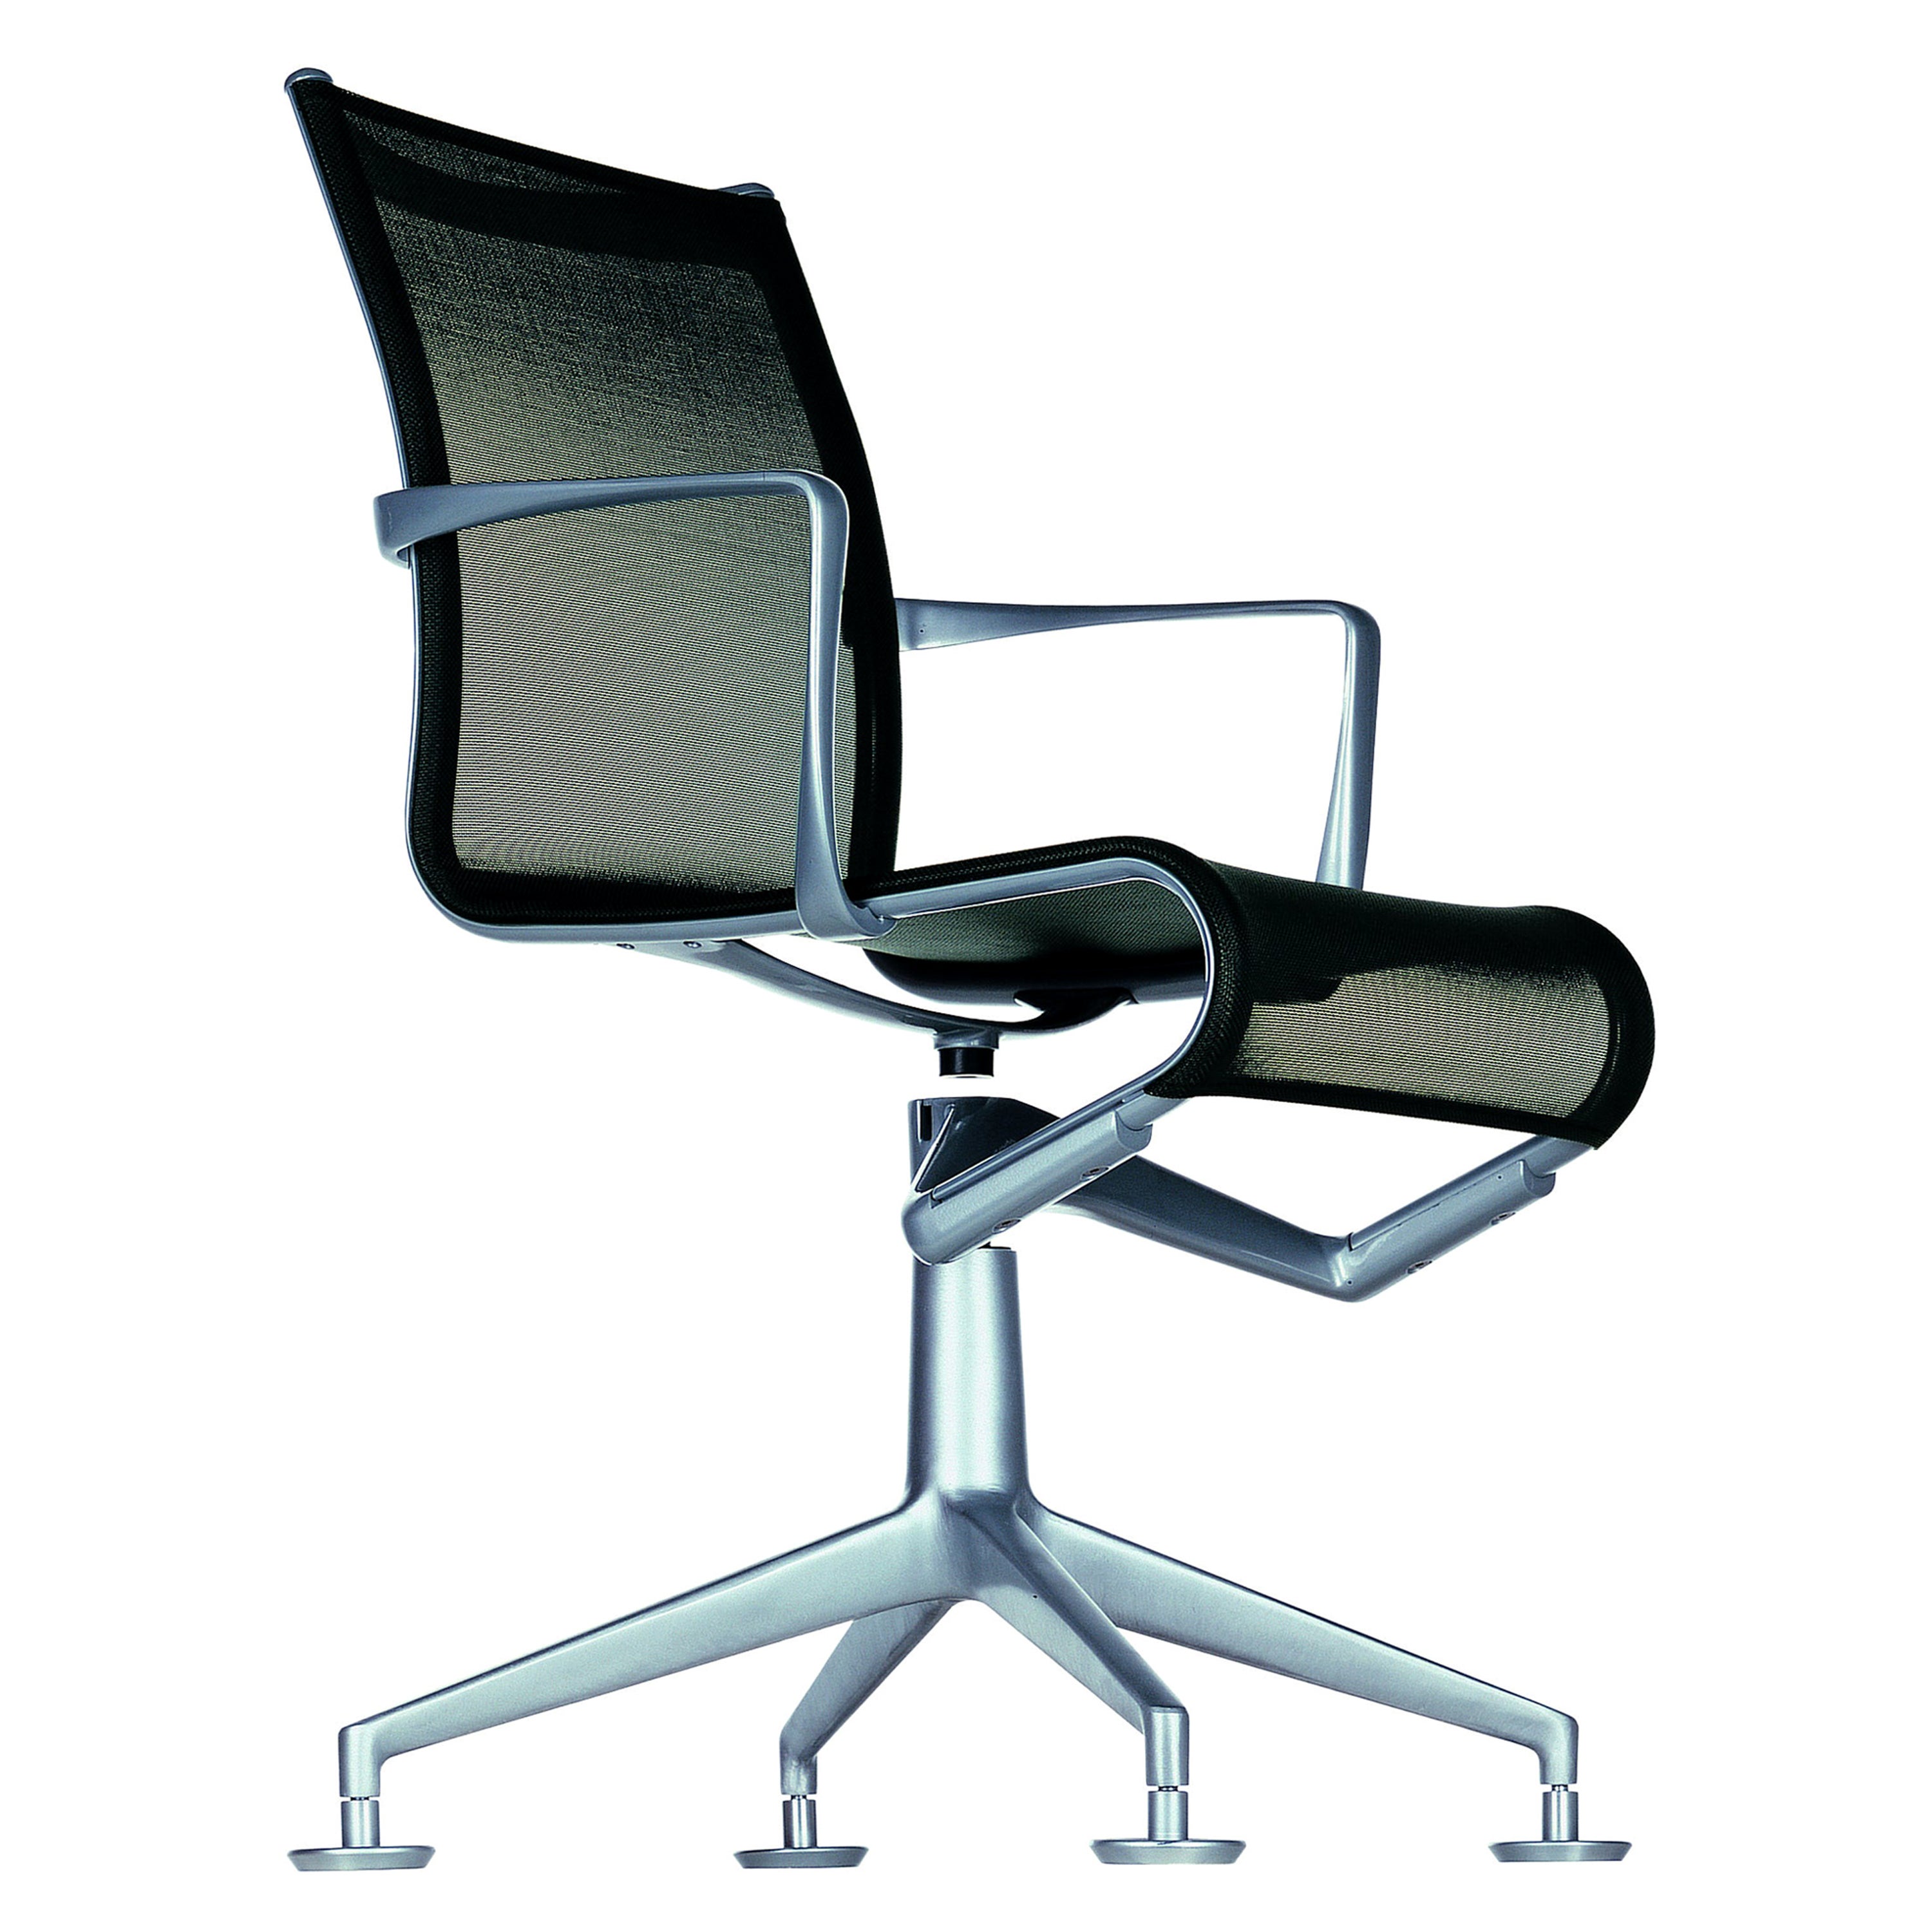 Alias 437 Meetingframe 44 Chair in Black Mesh with Lacquered Aluminum Frame For Sale